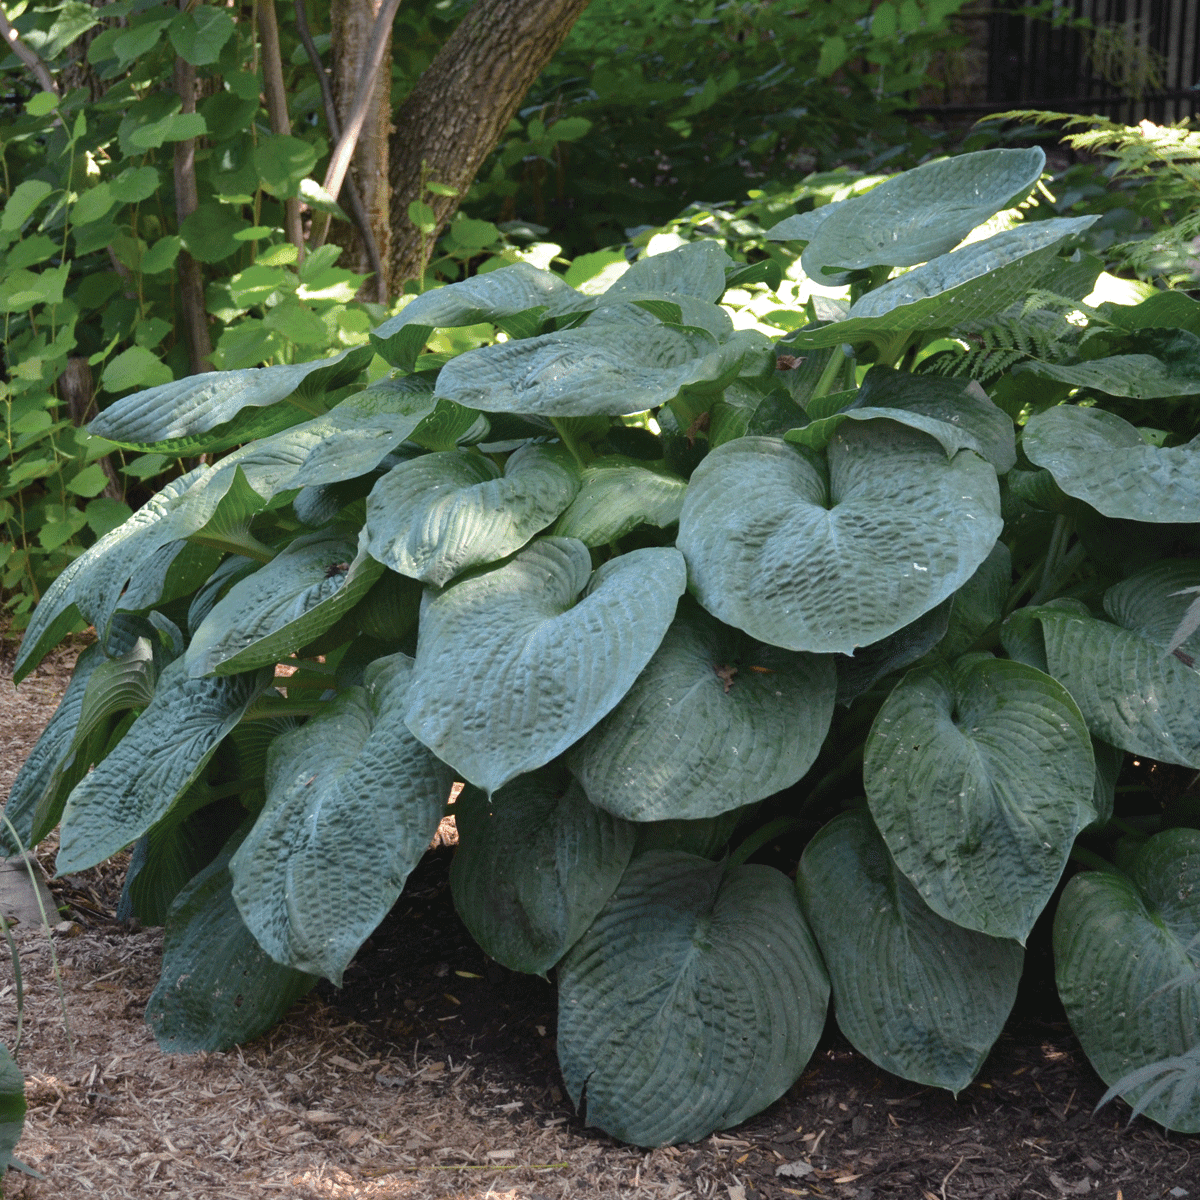 Introducing the Elegans Hosta, a plant that embodies elegance and beauty in every aspect. This remarkable Hosta forms sturdy mounds of foliage, showcasing large, heart-shaped leaves in a powdery-blue hue that exudes a sense of serenity and charm.